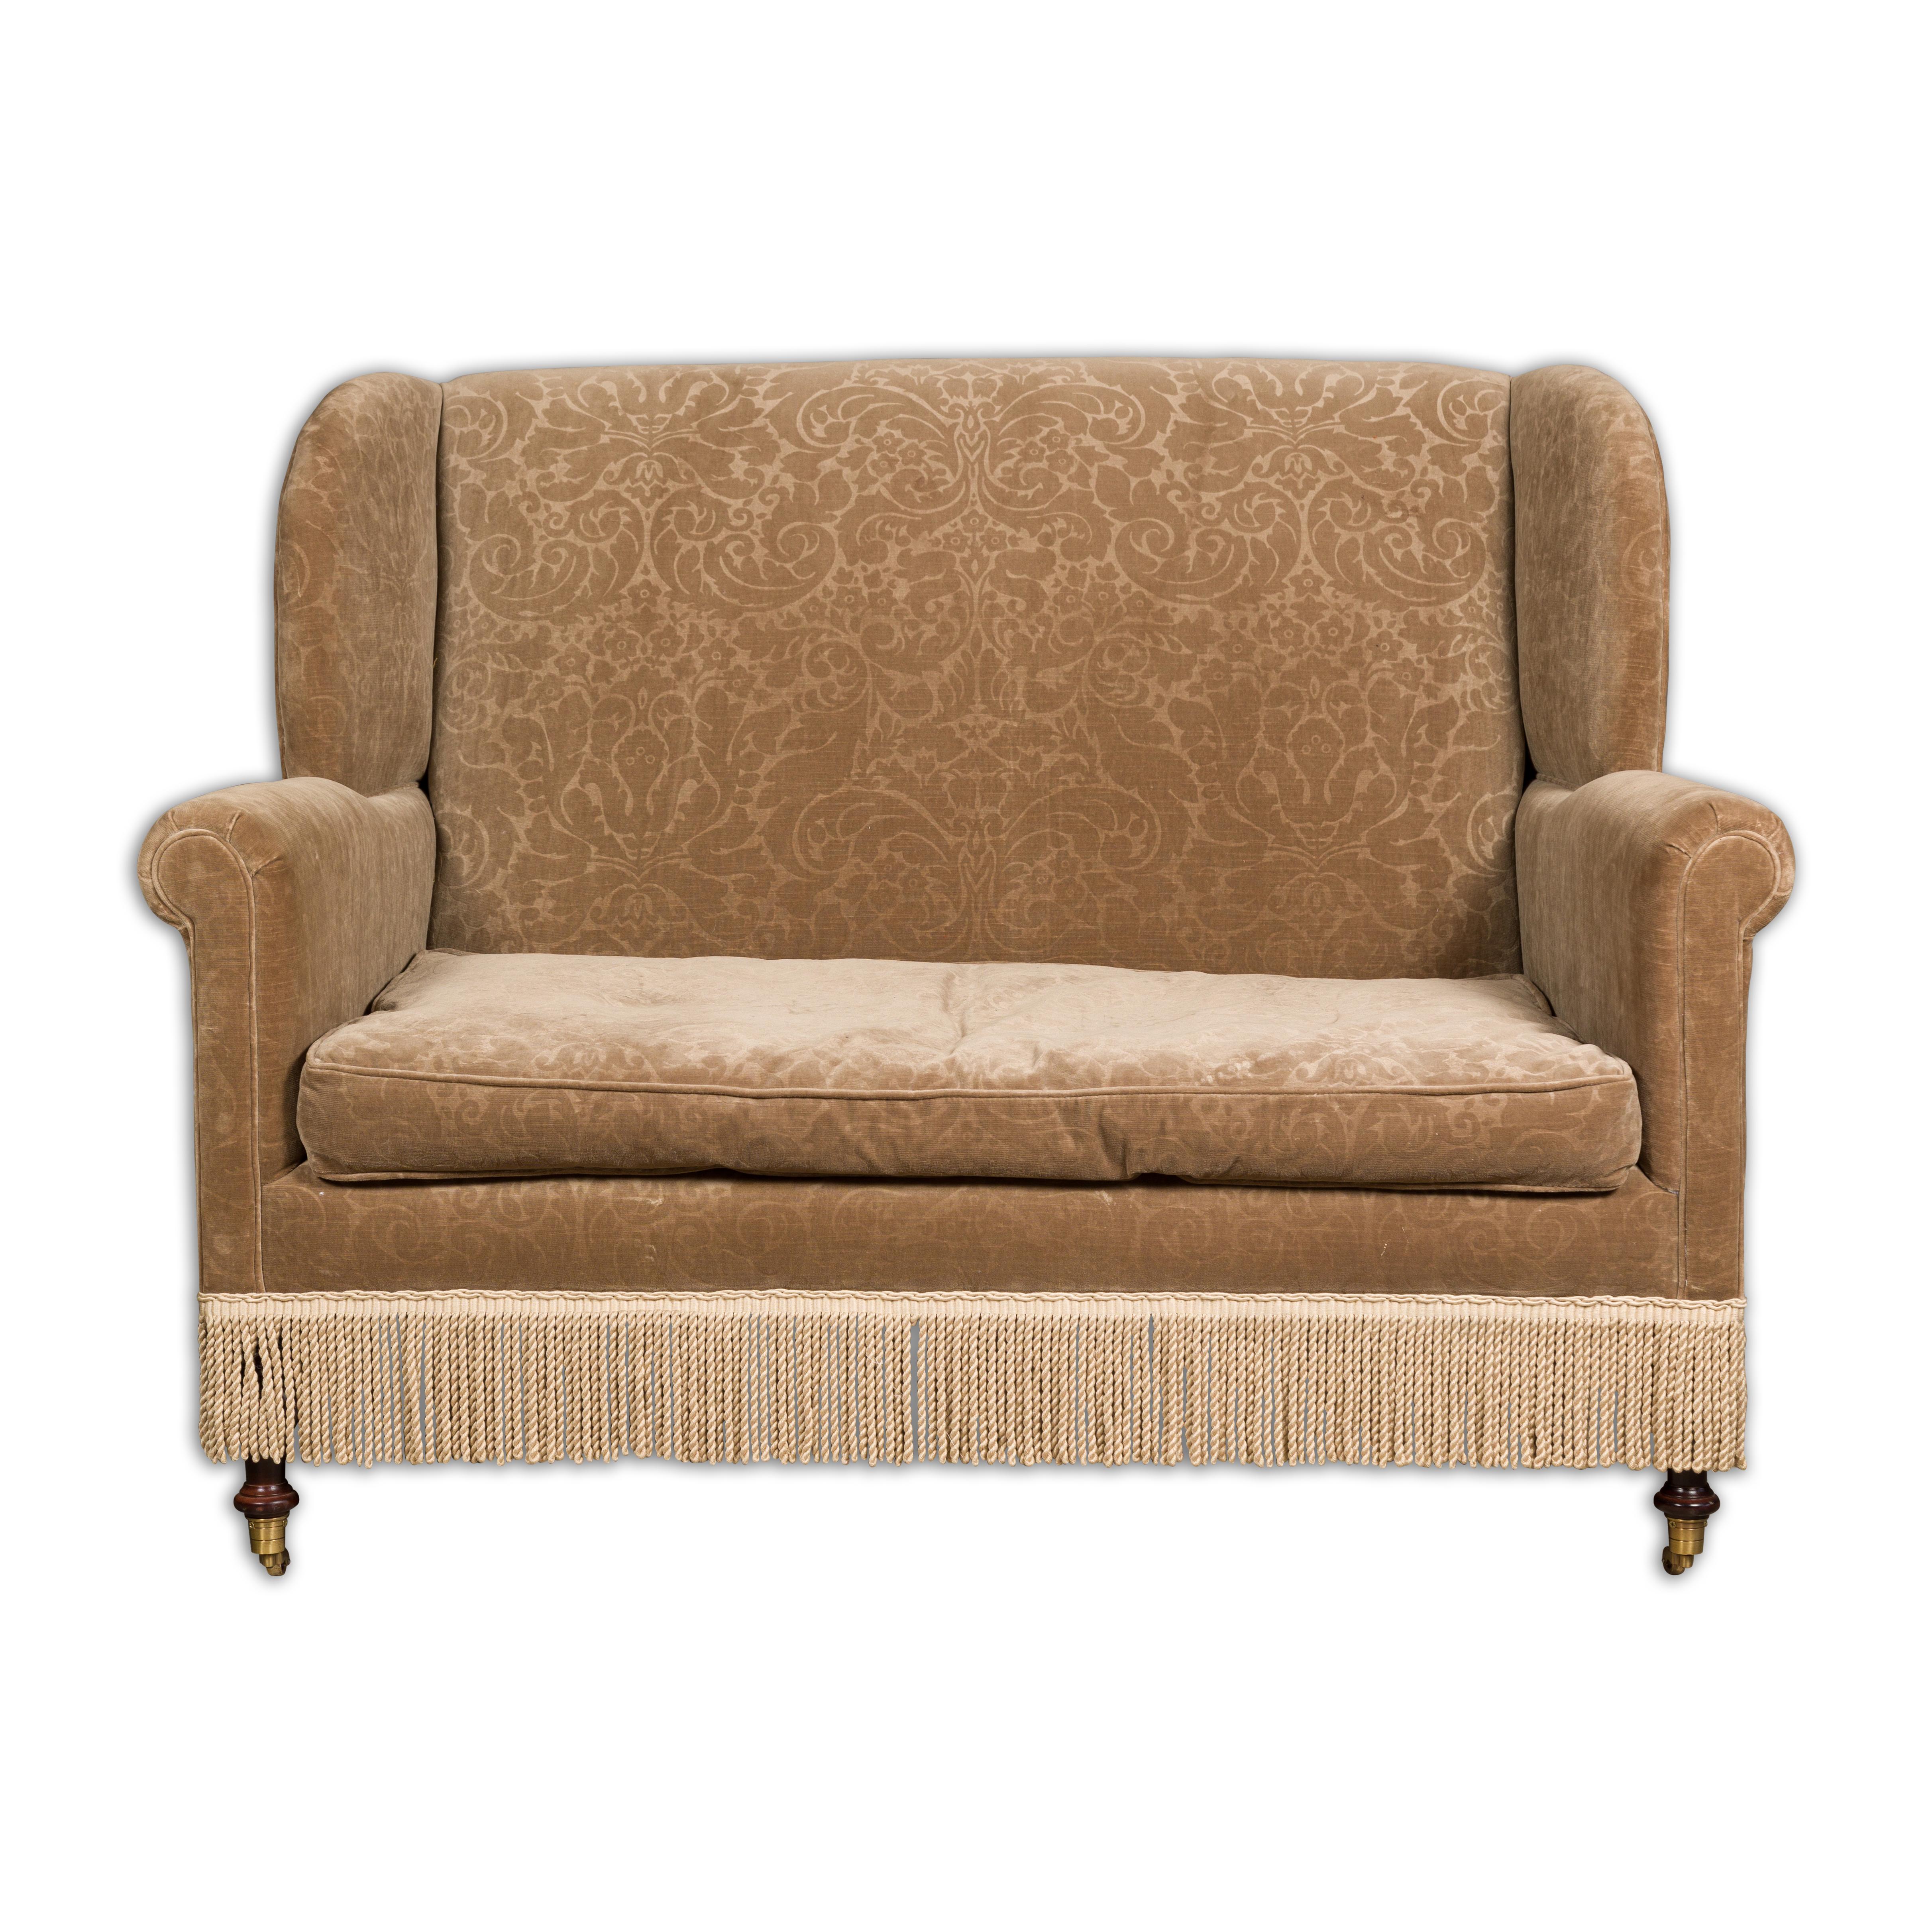 A vintage English wingback loveseat / settee with brown upholstery, out-scrolling arms and casters. This vintage English wingback loveseat, or settee, is a testament to timeless elegance and comfort. Upholstered in a brown fabric adorned with